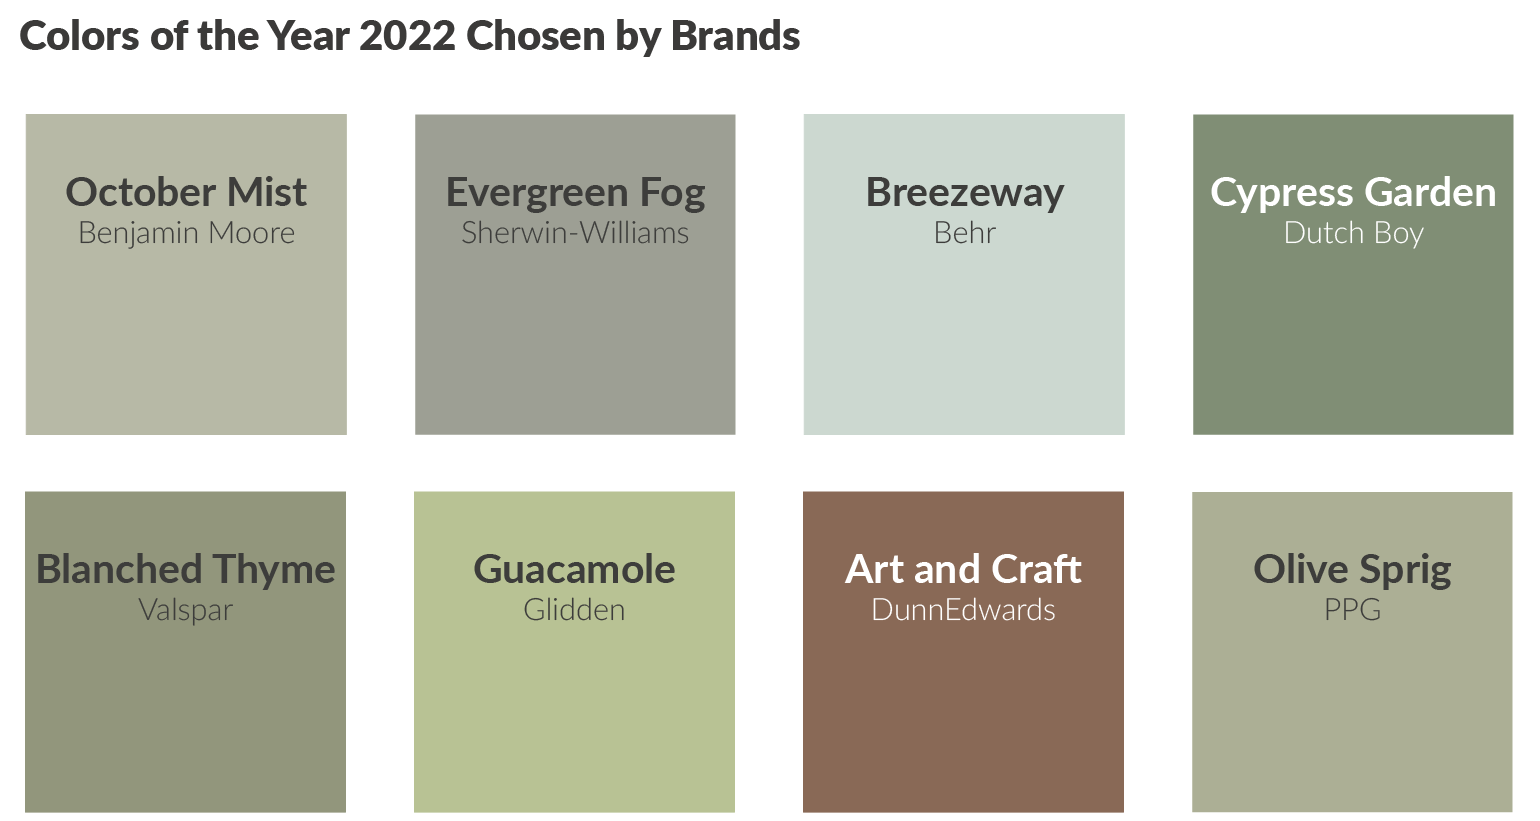 Colors of the Year 2022 by Brands